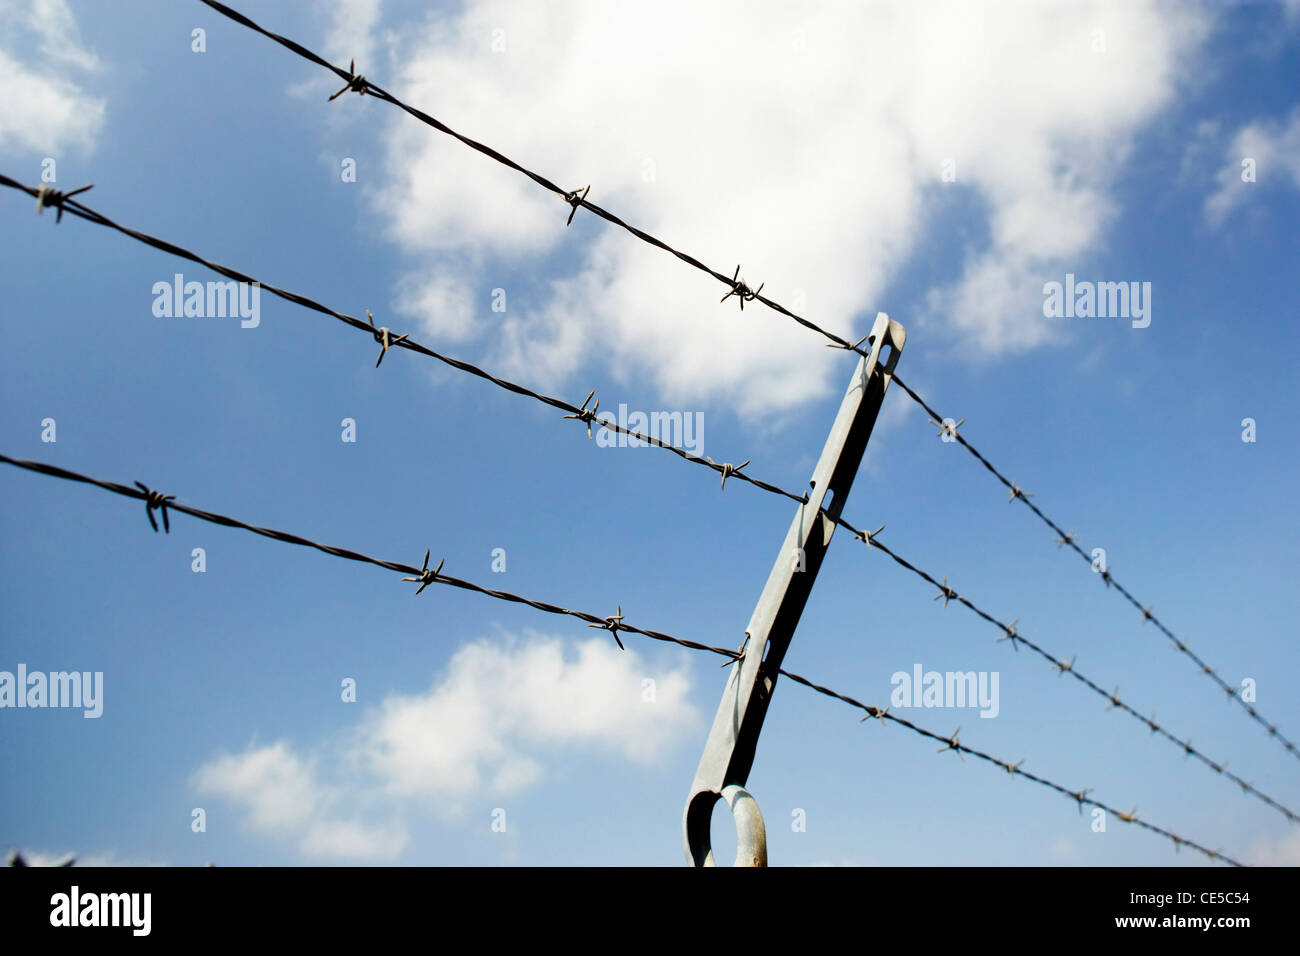 Barbed wire fence against a clear blue sky Stock Photo